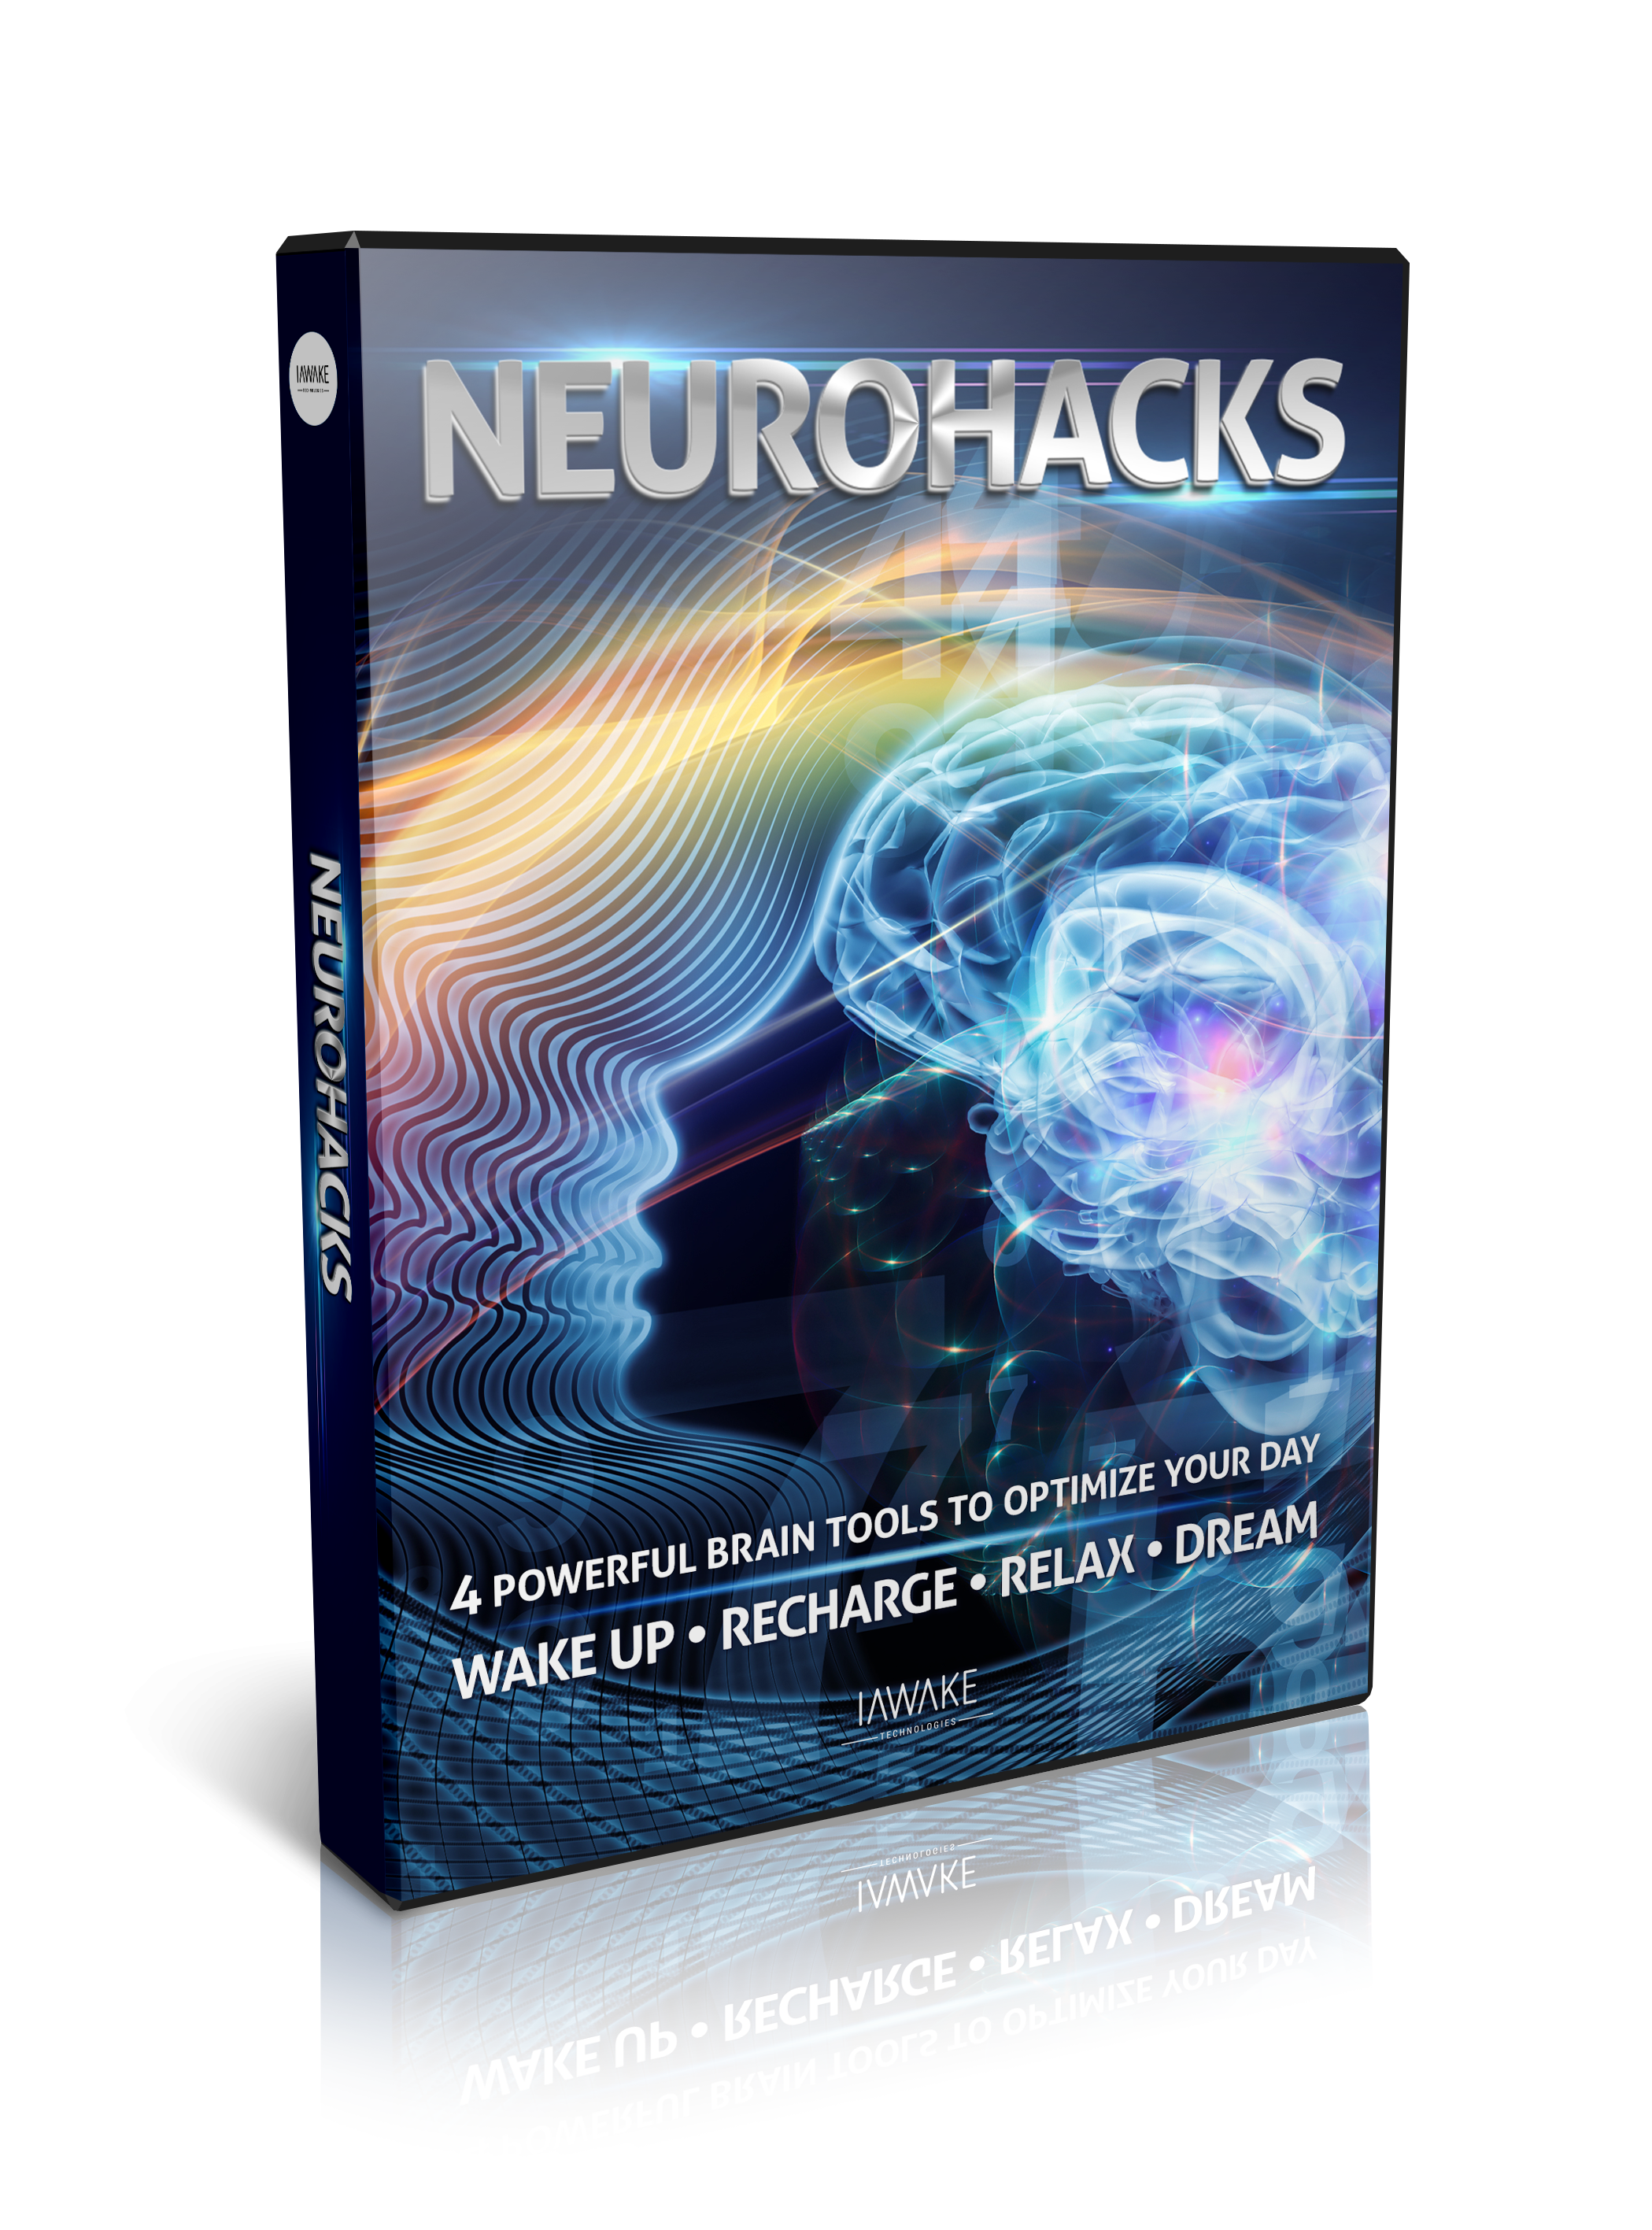 Neurohacks! 4 Powerful Brain Tools to Optimize Your Day... Get Your Life on Track.